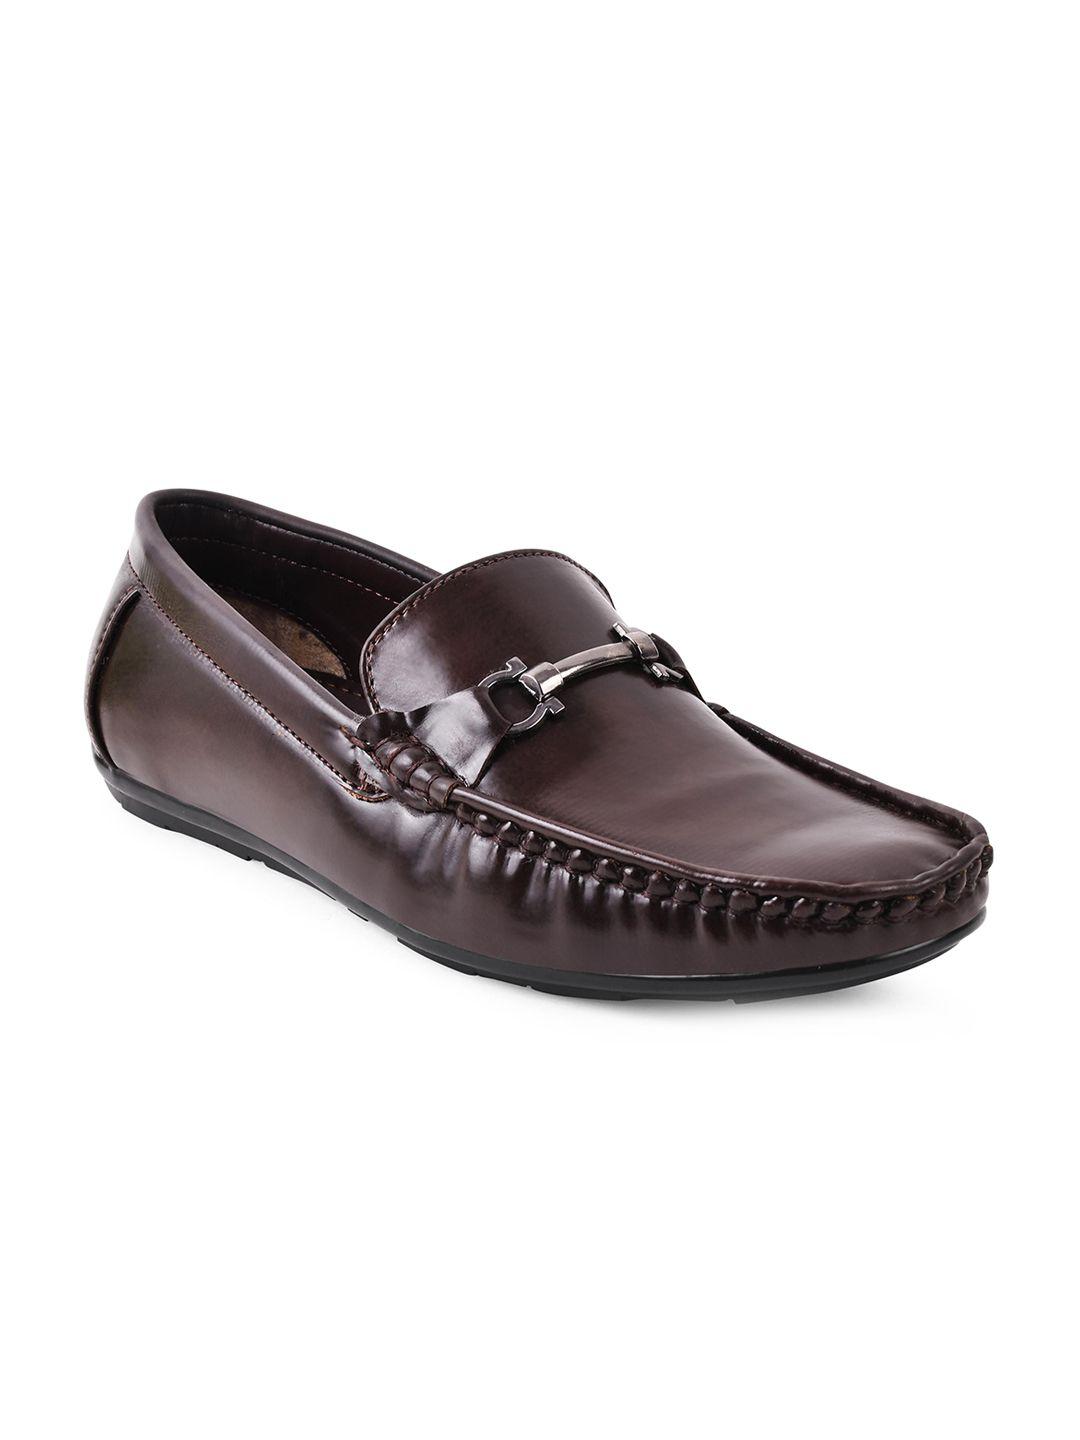 paragon-men-round-toe-metal-accents-formal-loafers